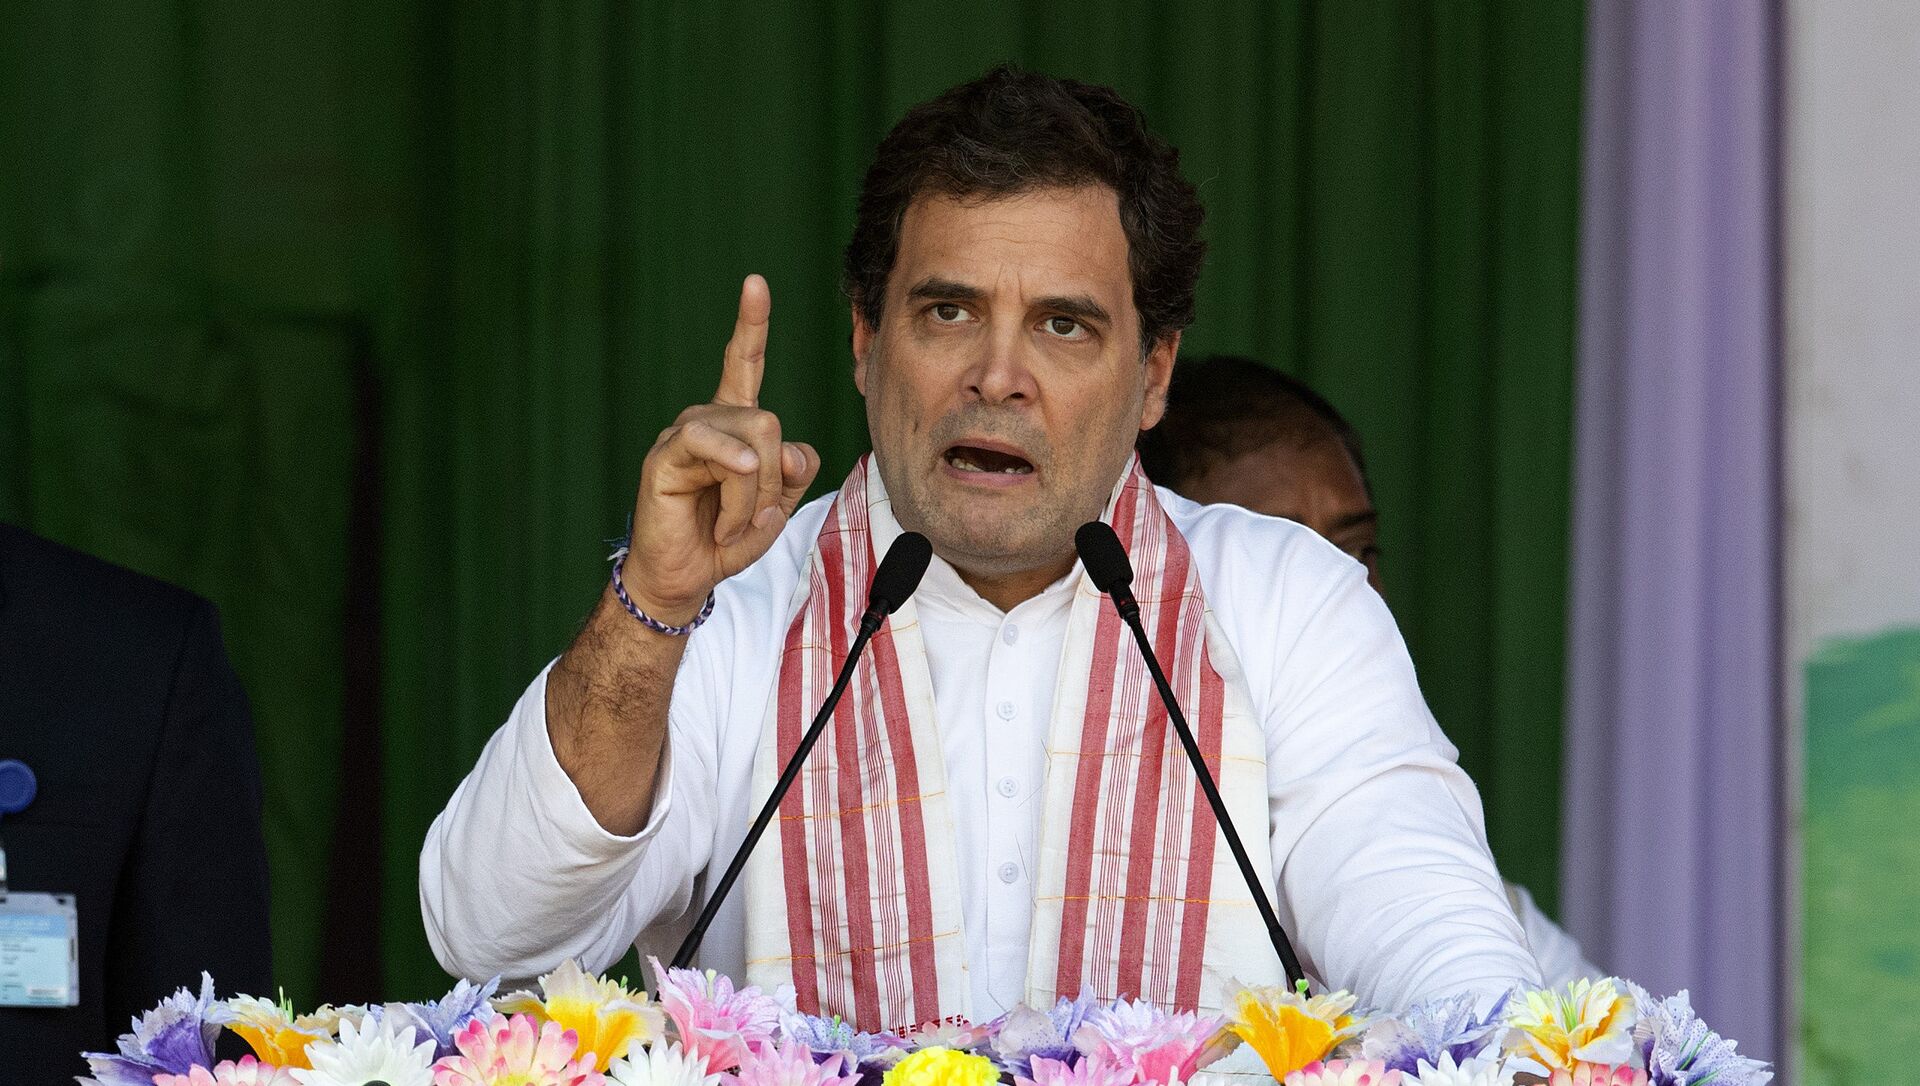 India's opposition Congress party leader Rahul Gandhi speaks at a rally against the Citizenship Amendment Act in Gauhati, India, Saturday, Dec. 28, 2019 - Sputnik International, 1920, 22.02.2021